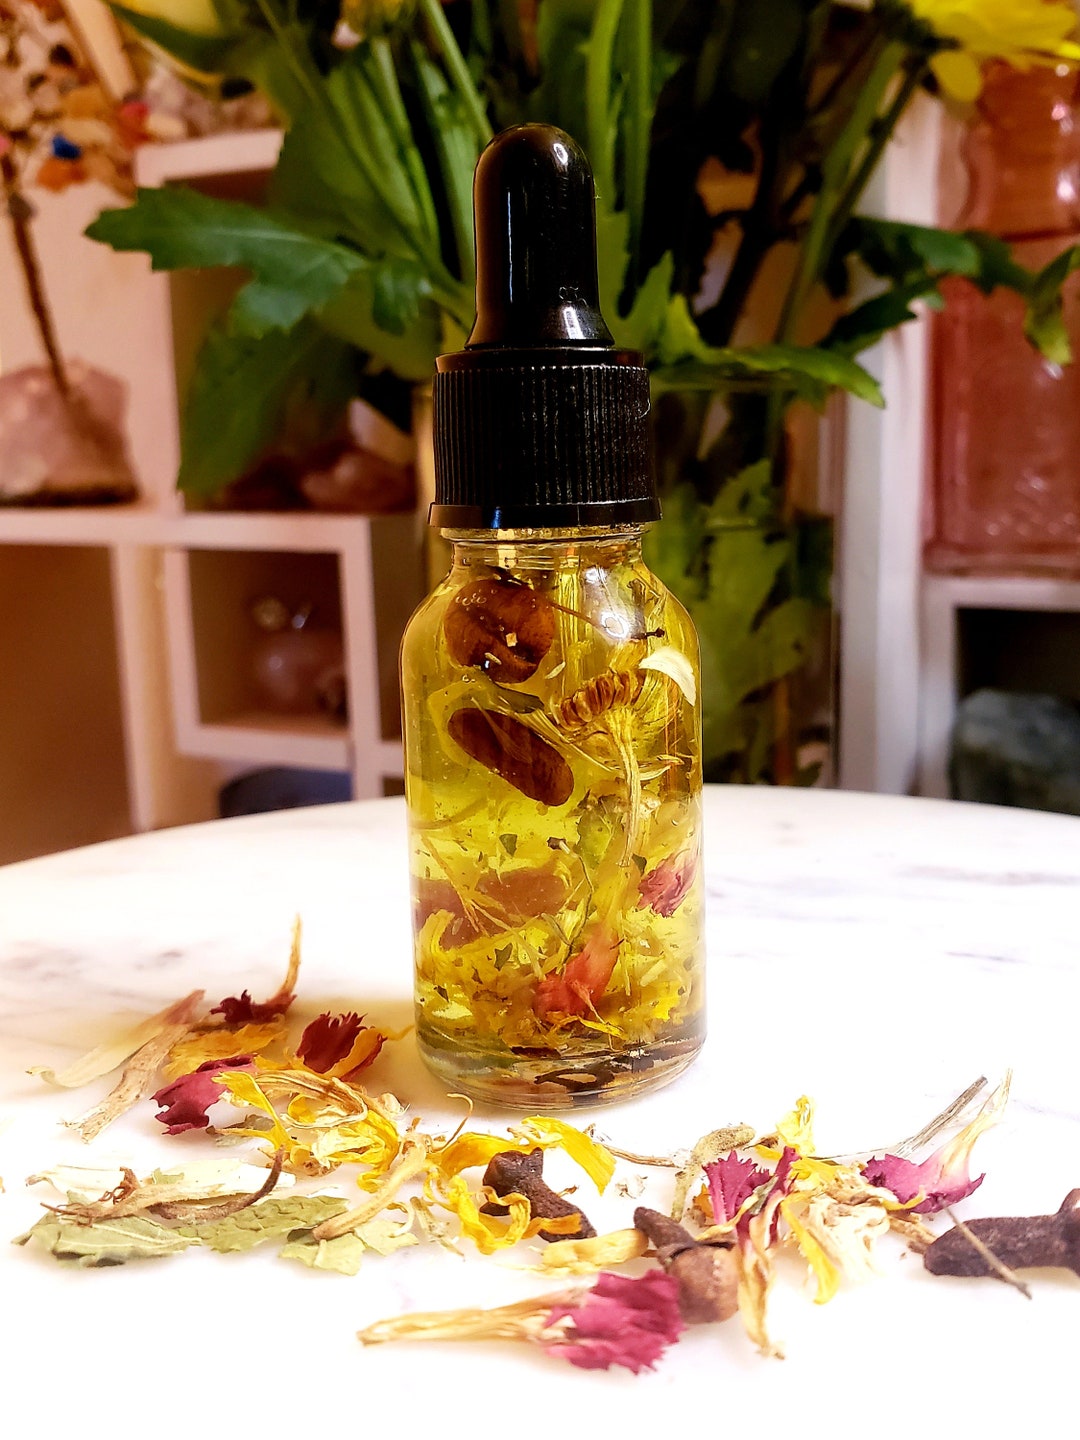 Confidence Oil Strength Oil Networking Connections & - Etsy